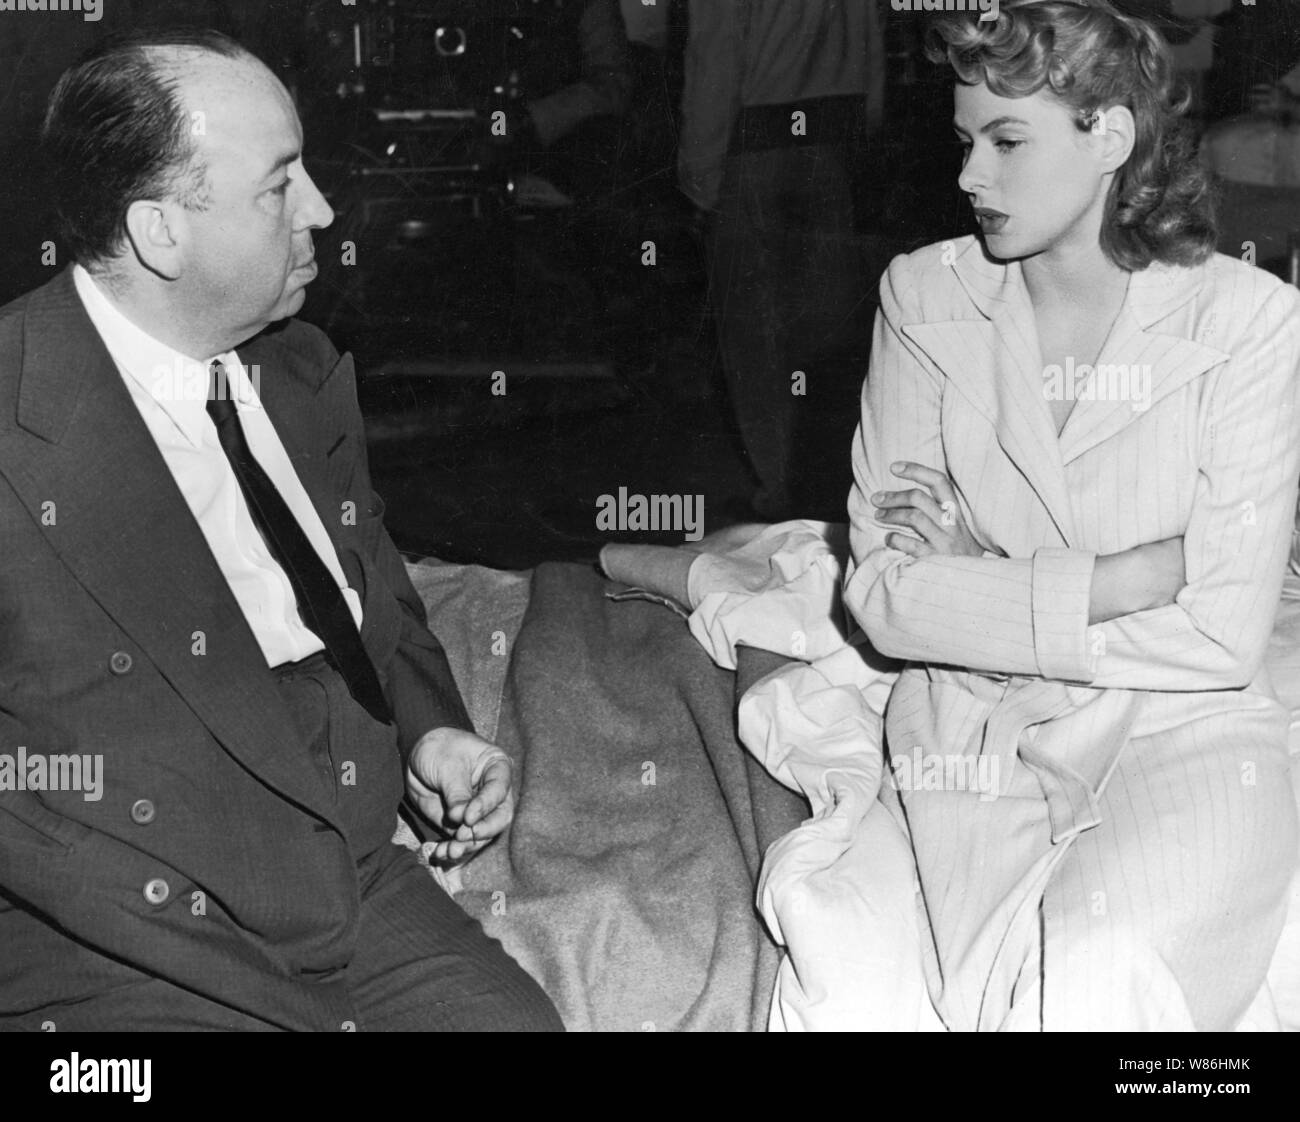 INGRID BERGMAN and ALFRED HITCHCOCK in SPELLBOUND (1945), directed by ALFRED HITCHCOCK. Credit: Selznick International Pictures/Vanguard Films / Album Stock Photo